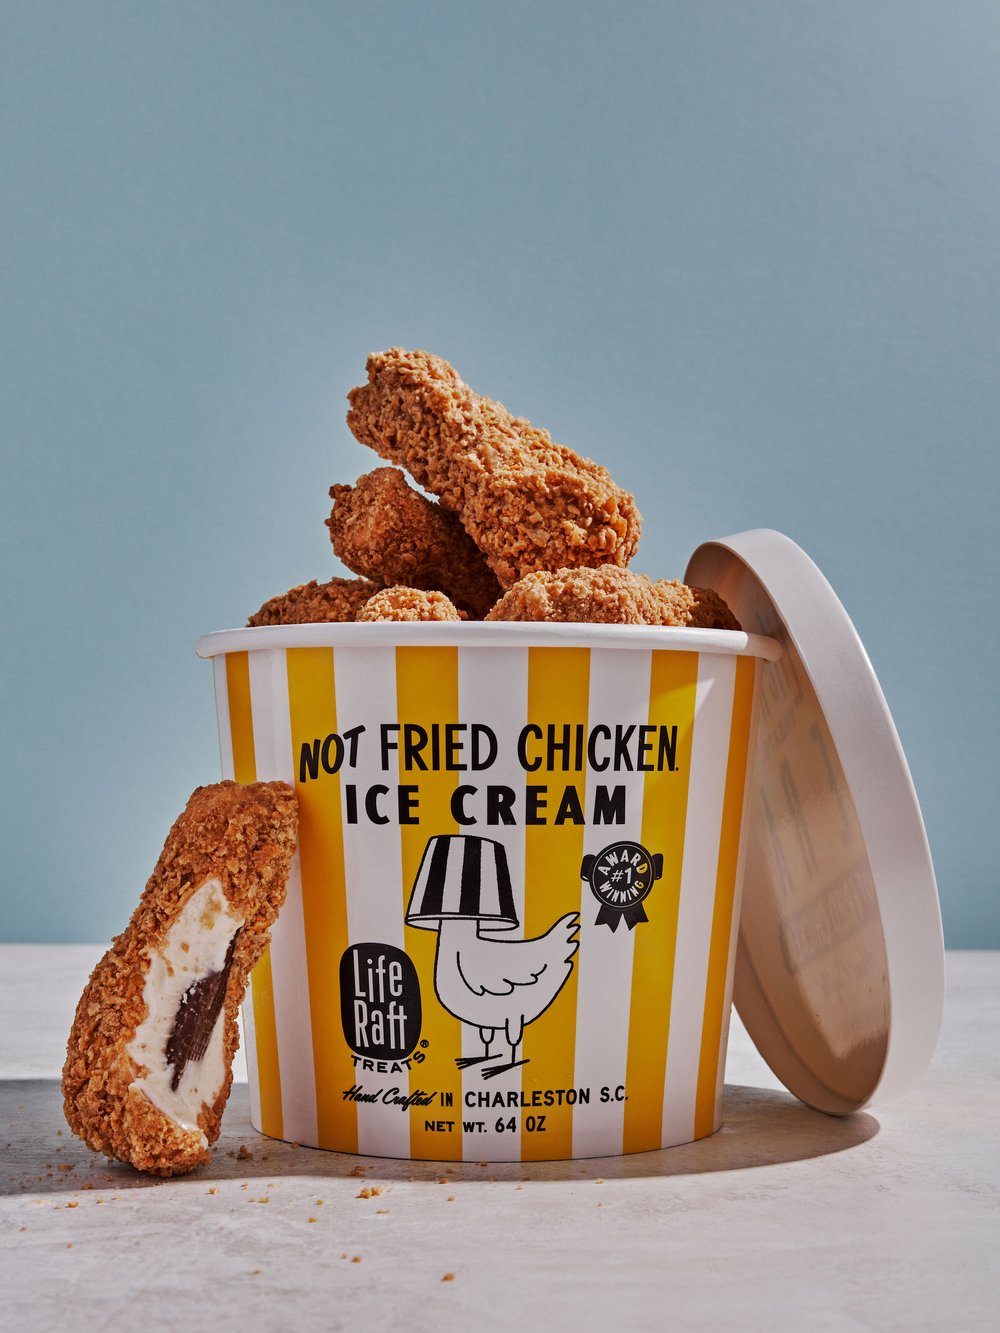 Check Out The *Super Interesting* Fried Chicken Ice Cream